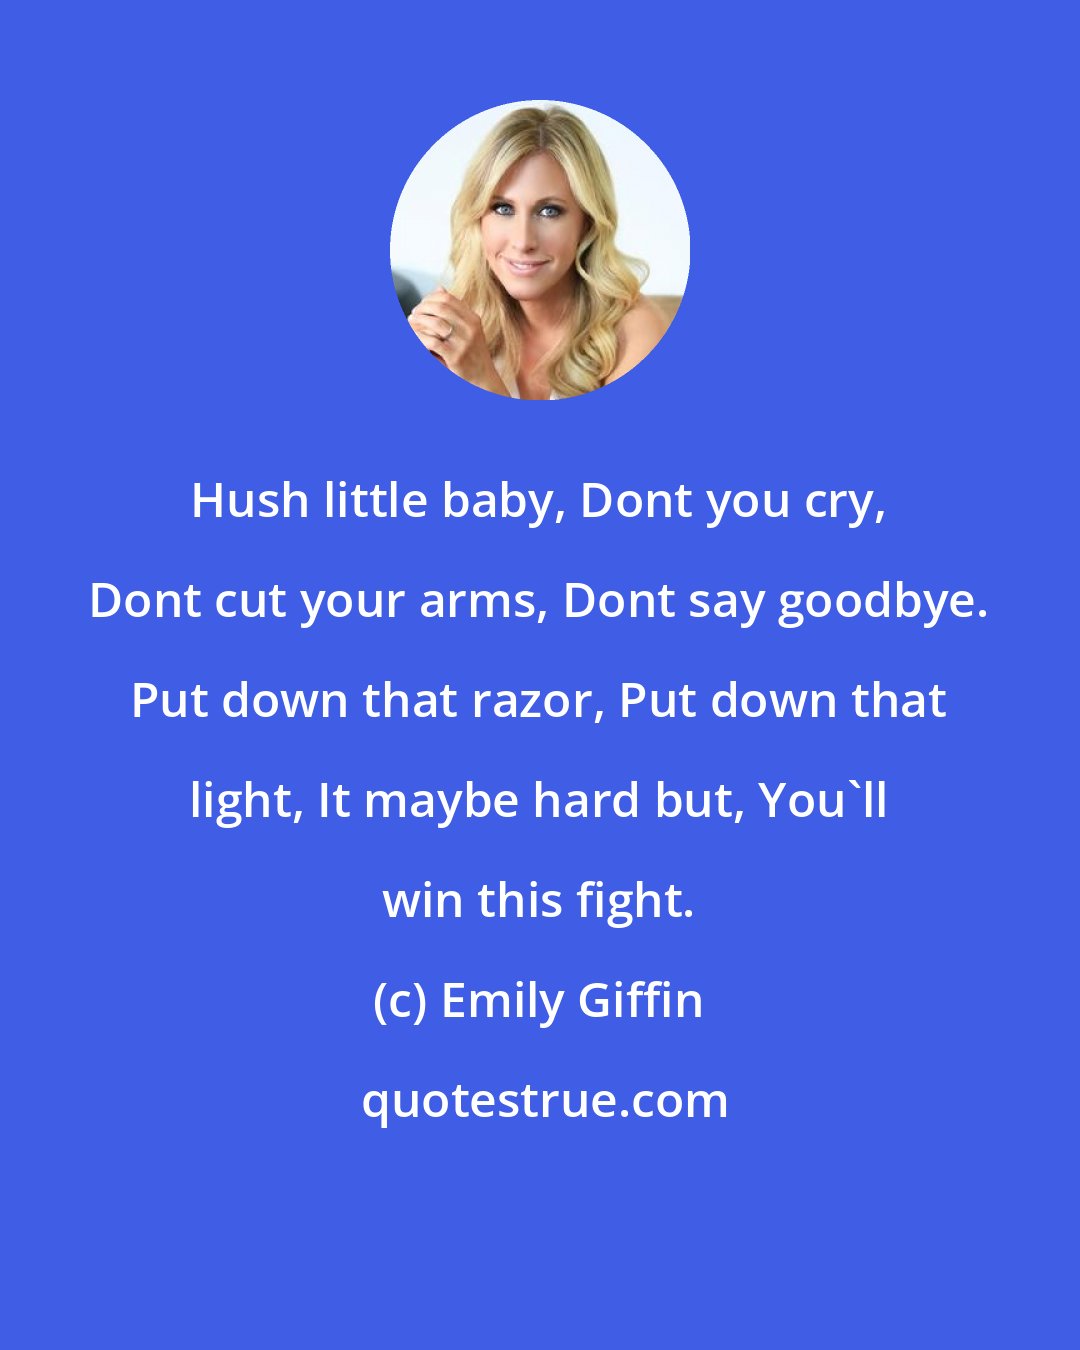 Emily Giffin: Hush little baby, Dont you cry, Dont cut your arms, Dont say goodbye. Put down that razor, Put down that light, It maybe hard but, You'll win this fight.